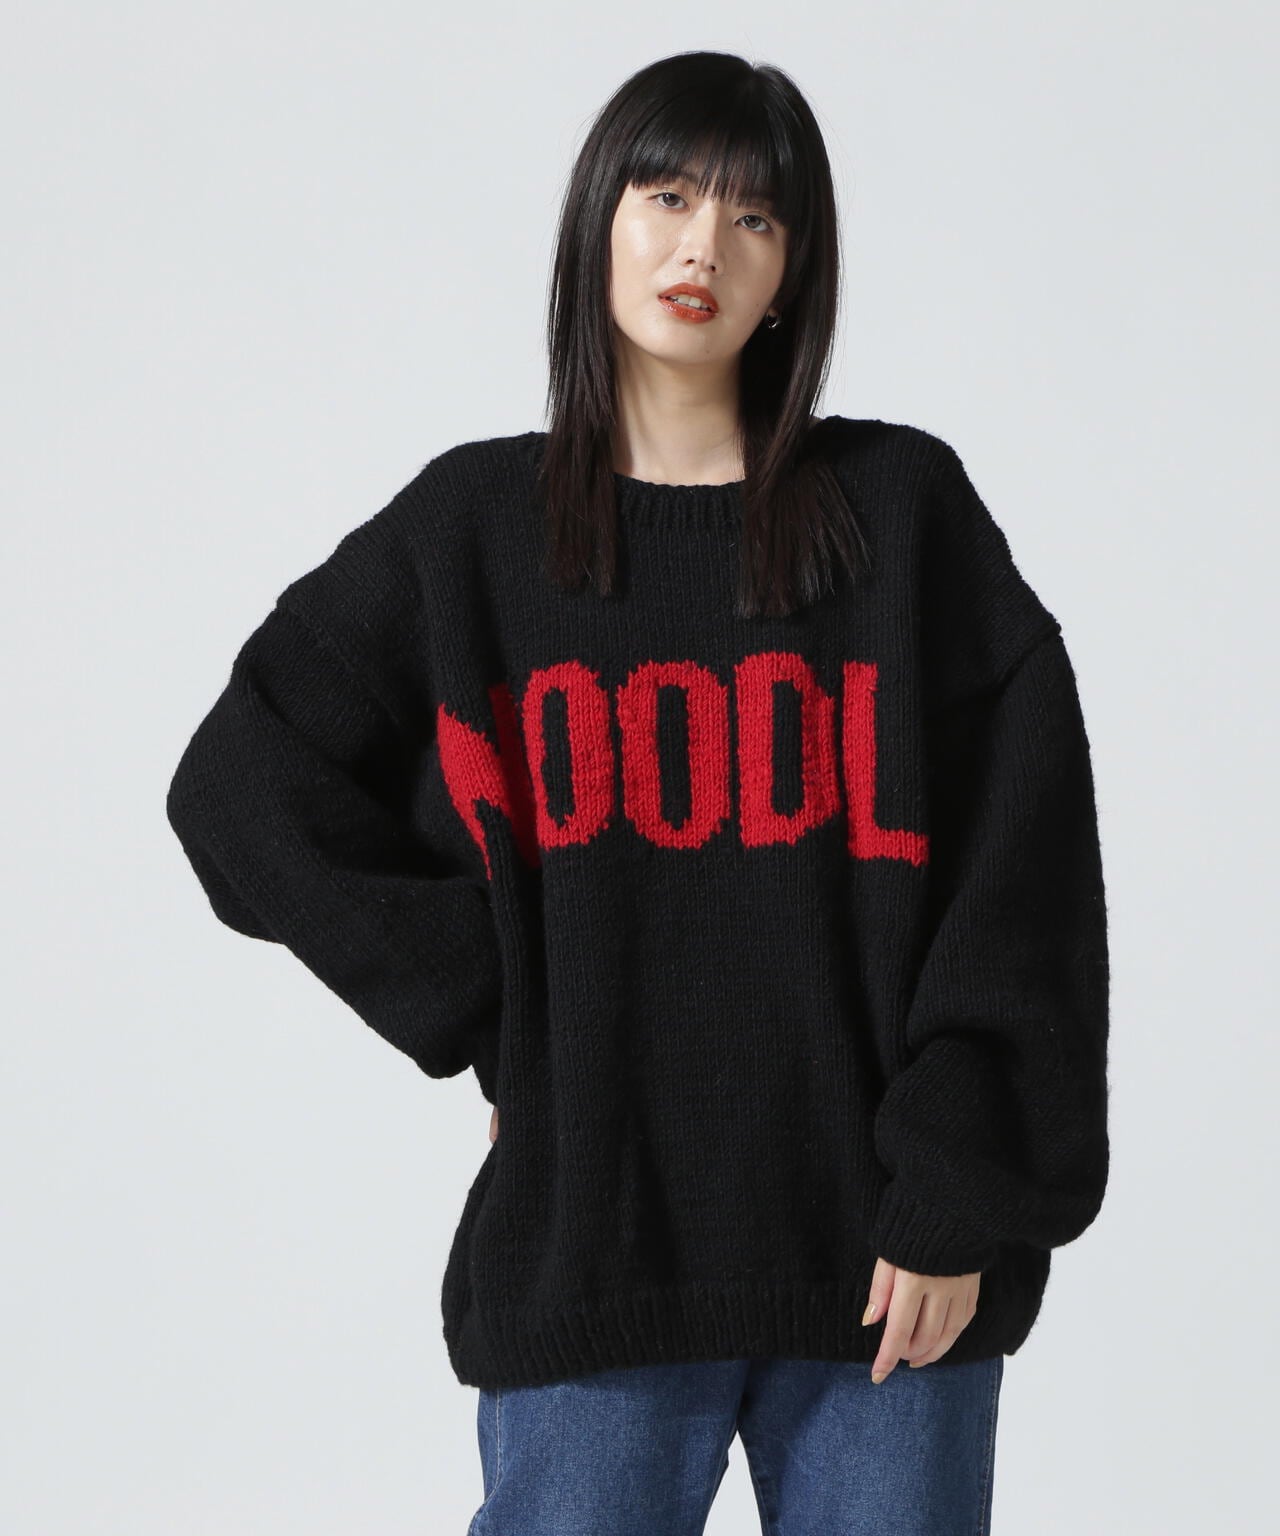 MacMahon Knitting Mills / Crew Neck Knit-NOODLE | B'2nd ( ビー 